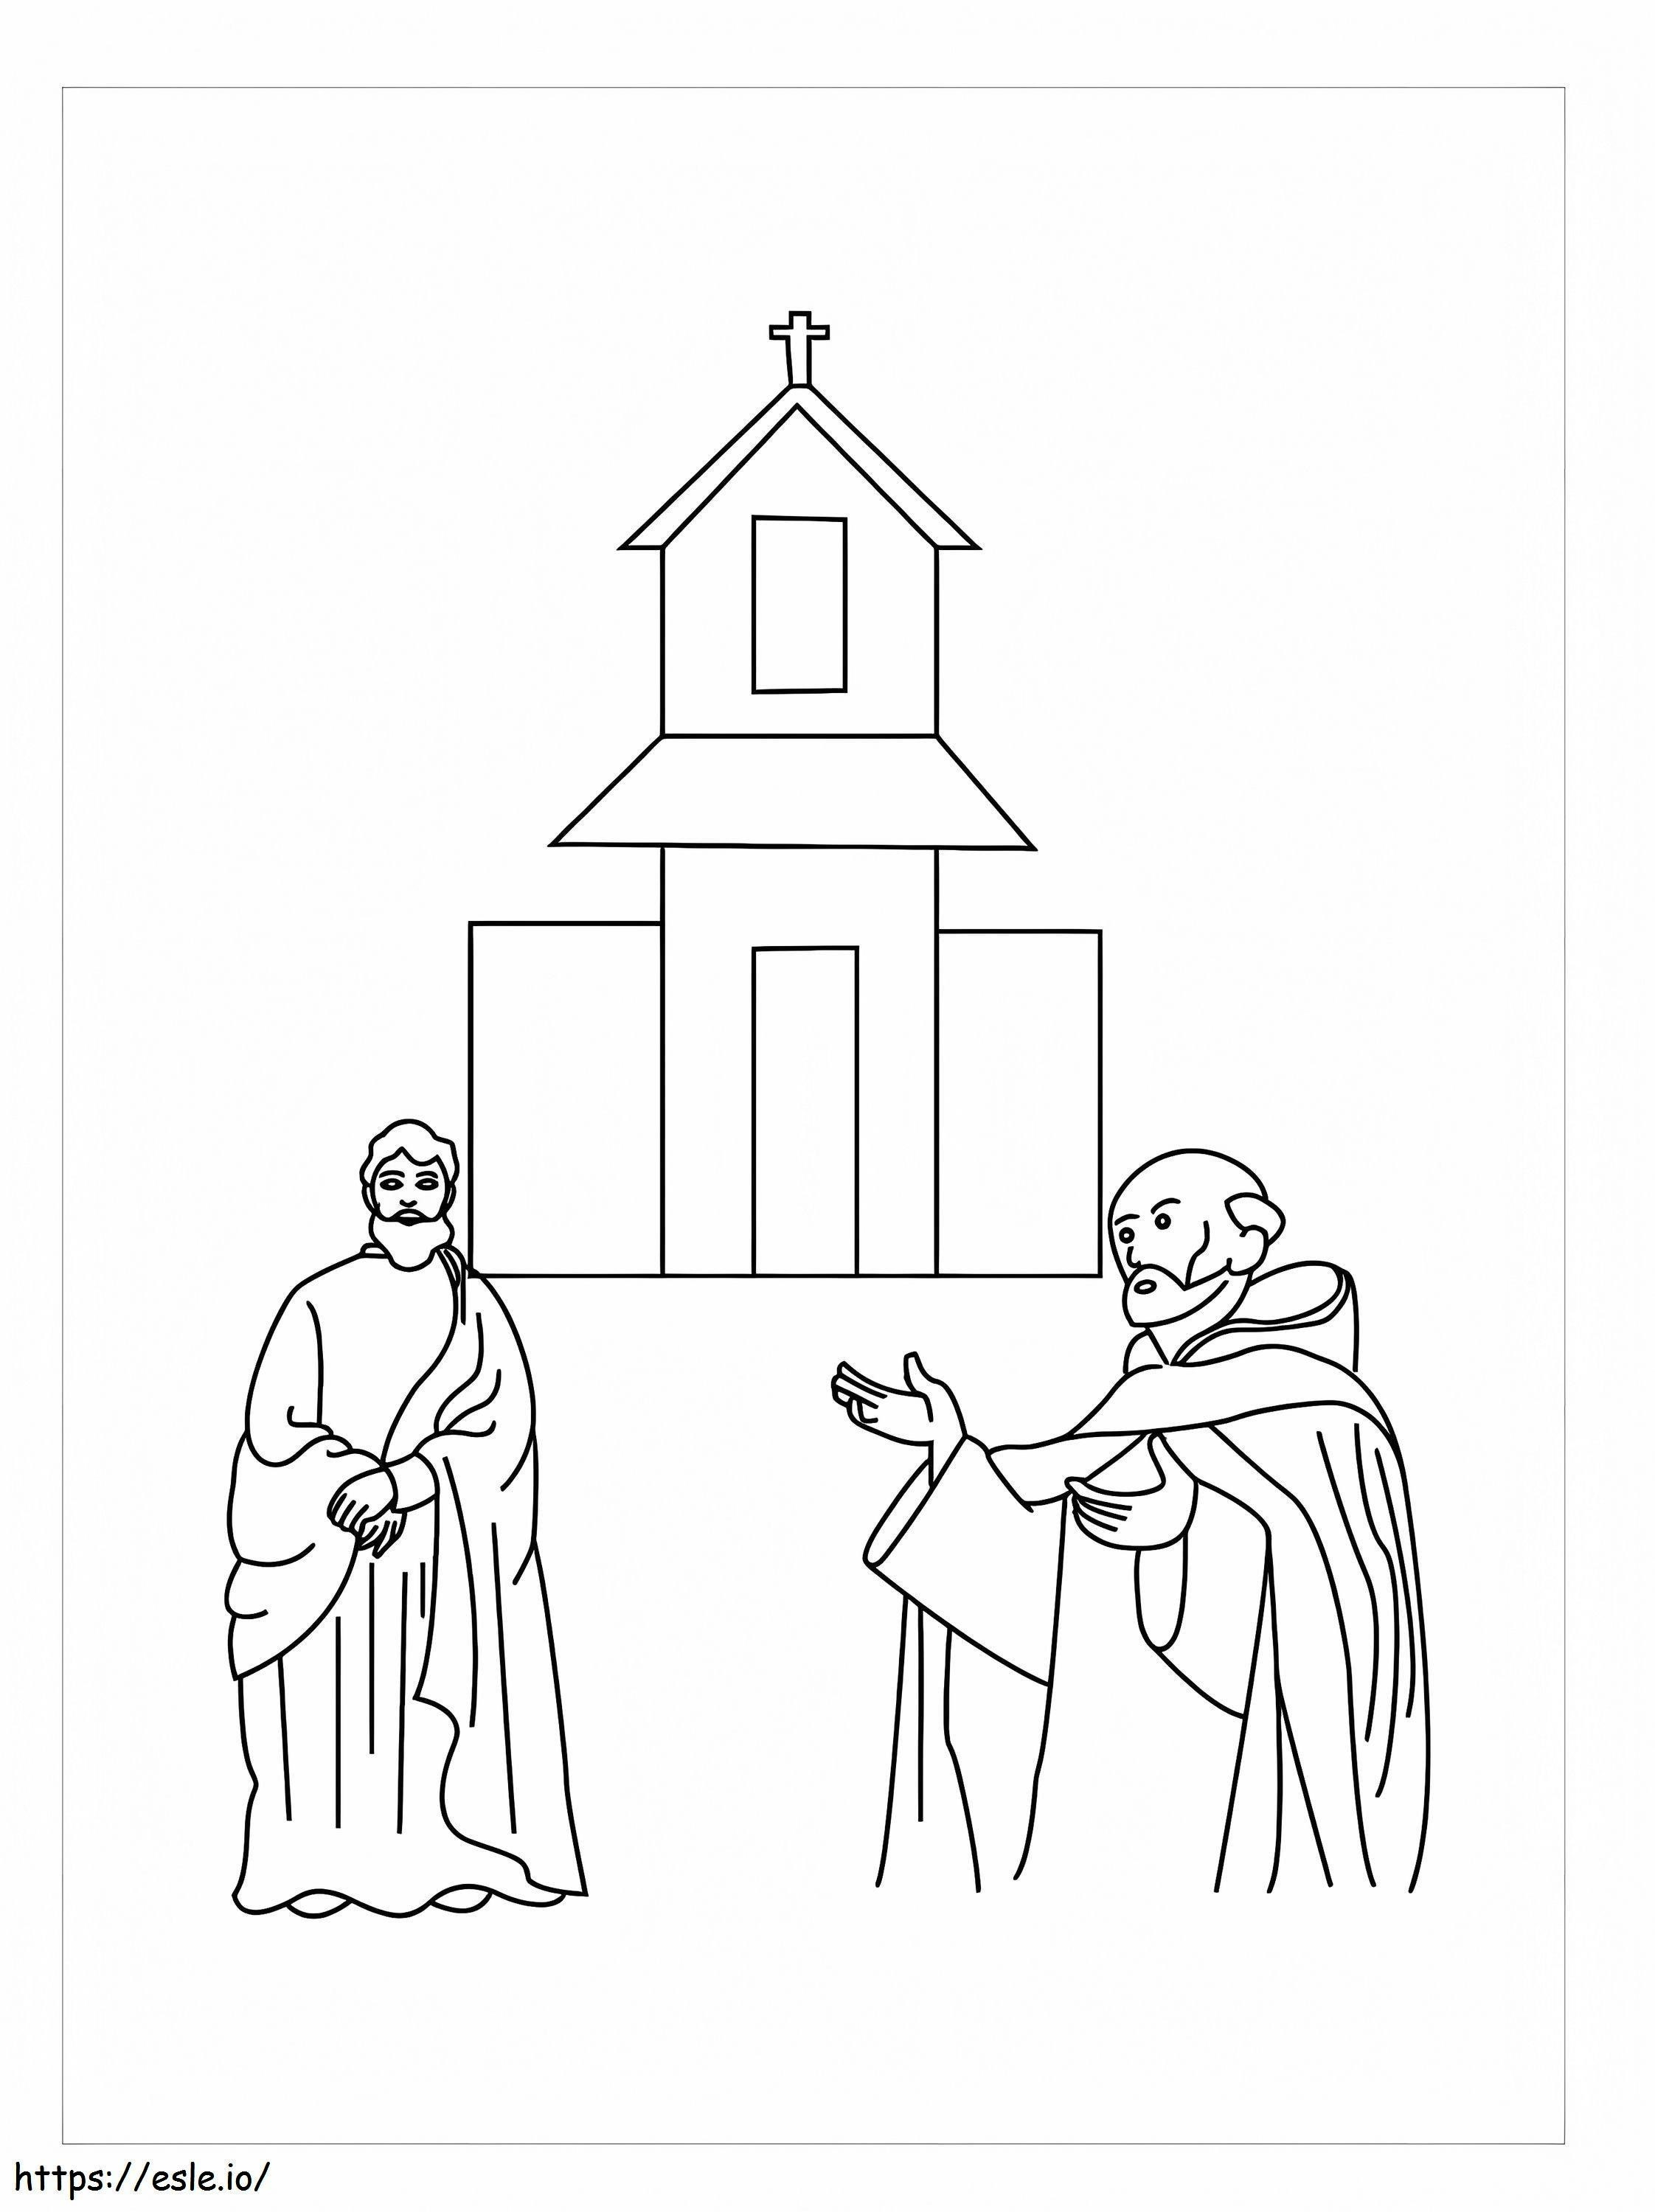 People Of The Early Church coloring page